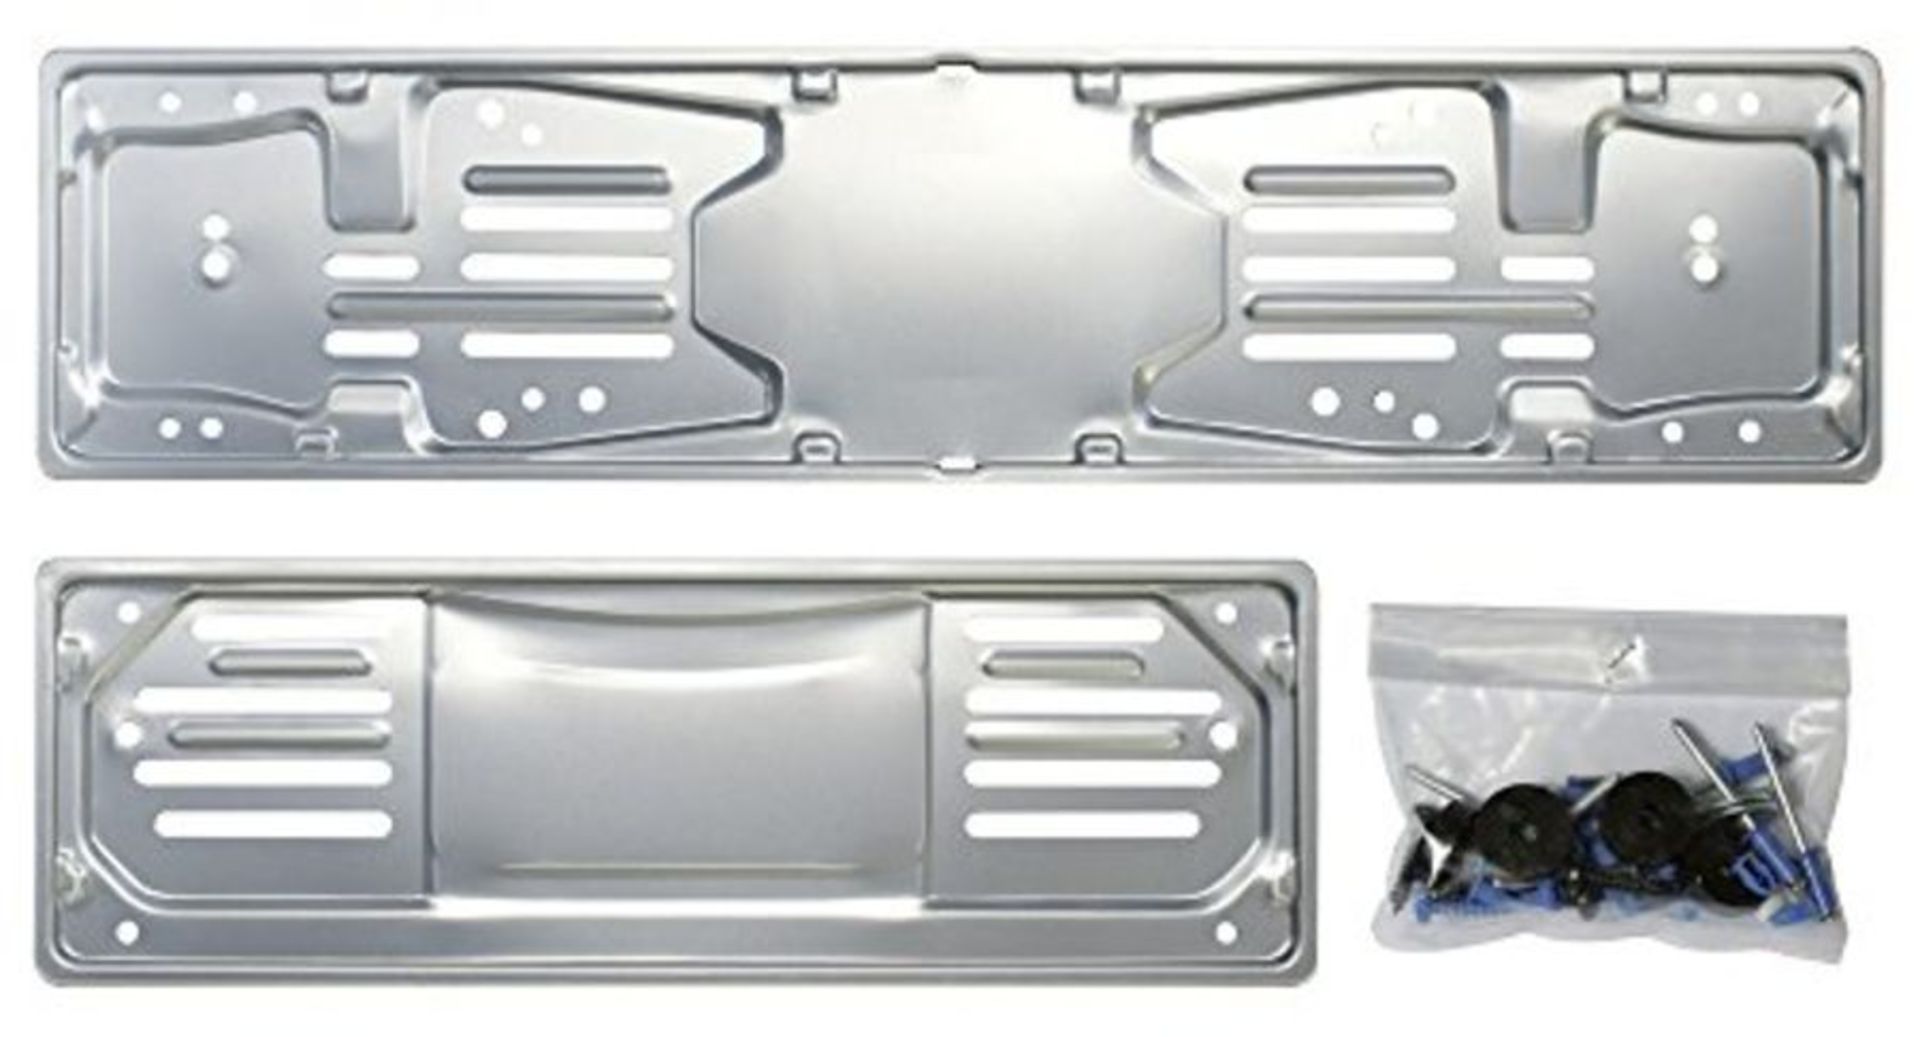 Cora 000116008 Kit Registration Plate 1999 Aluminium Front and Rear Mount with Fixin